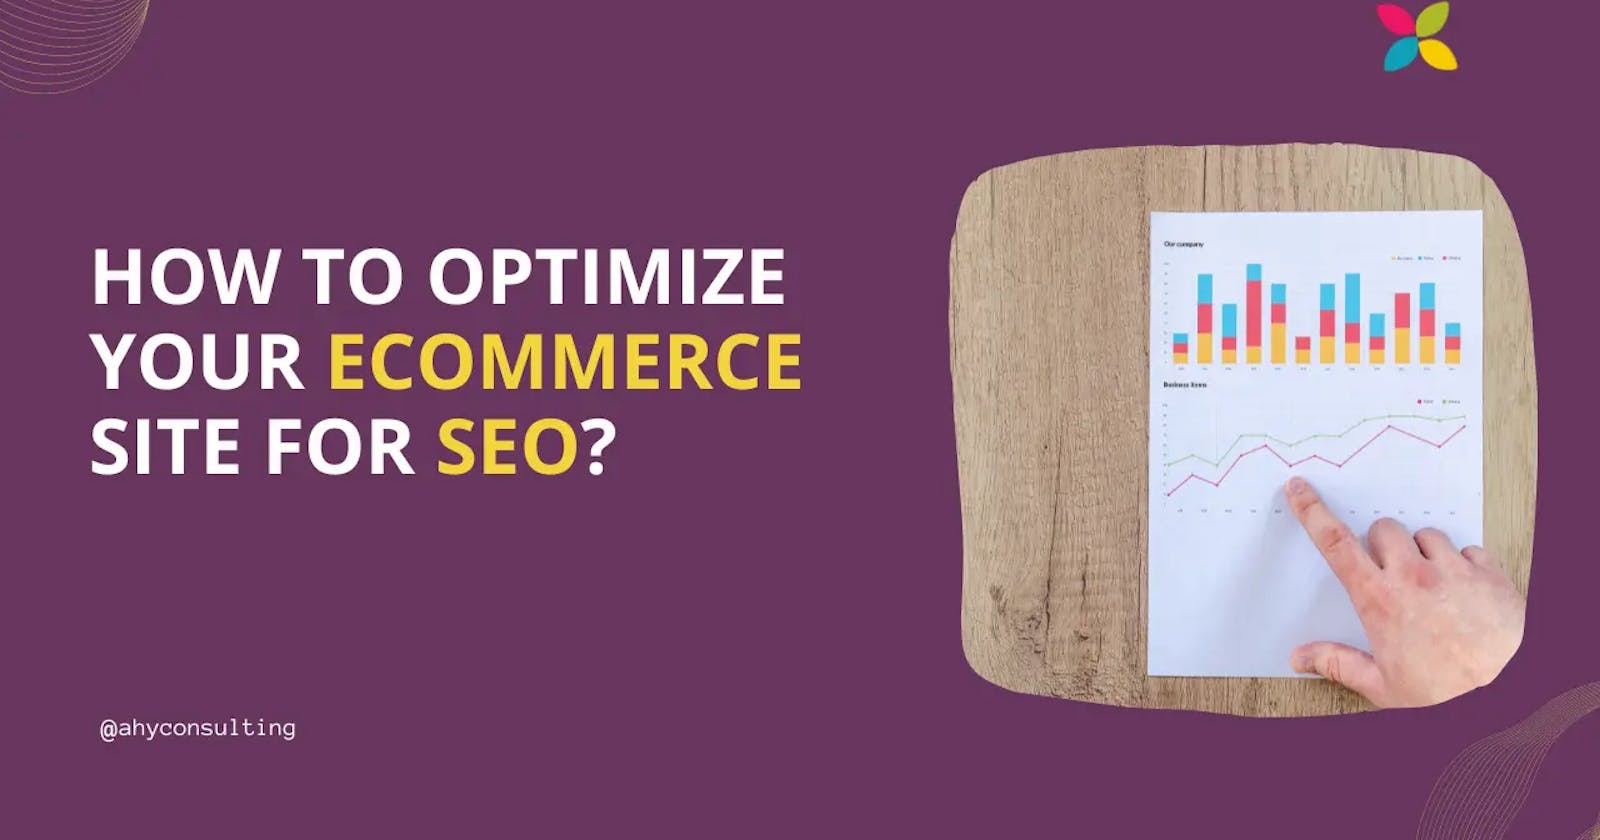 How to Optimize Your eCommerce Site for SEO?